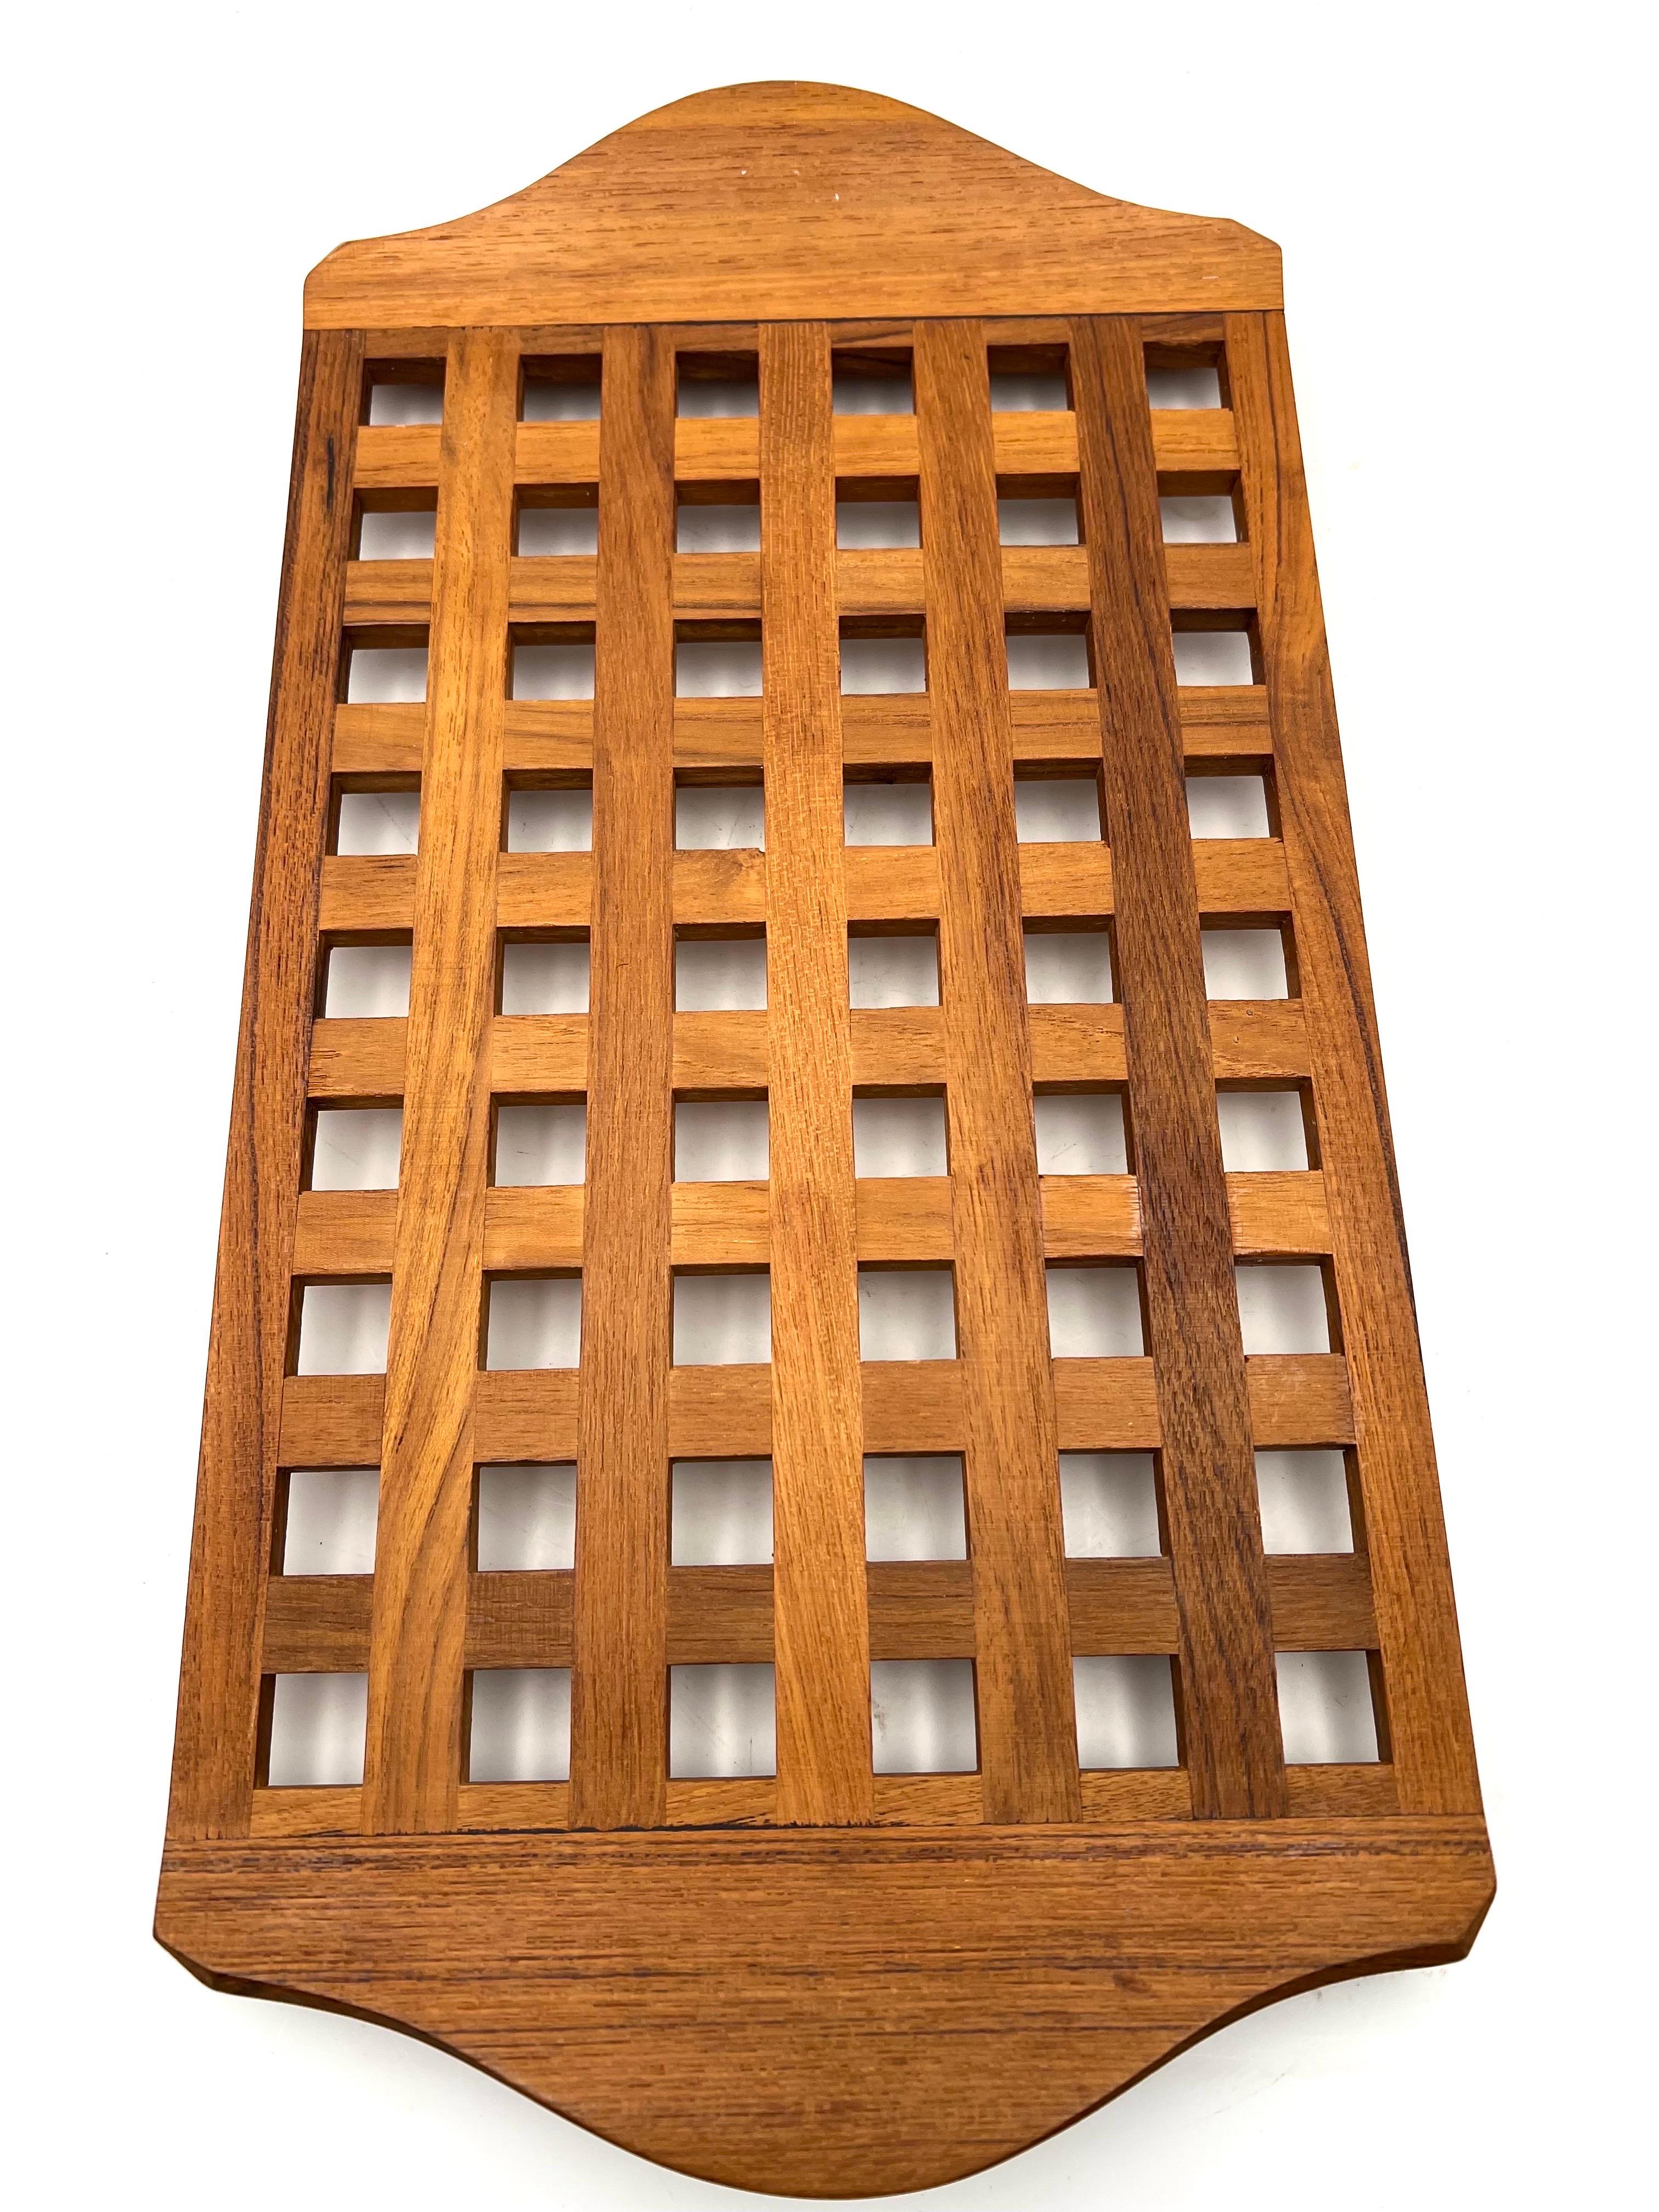 20th Century 1950s Solid Teak Danish Modern Rare Large Tray Designed by Quistgaard for Dansk